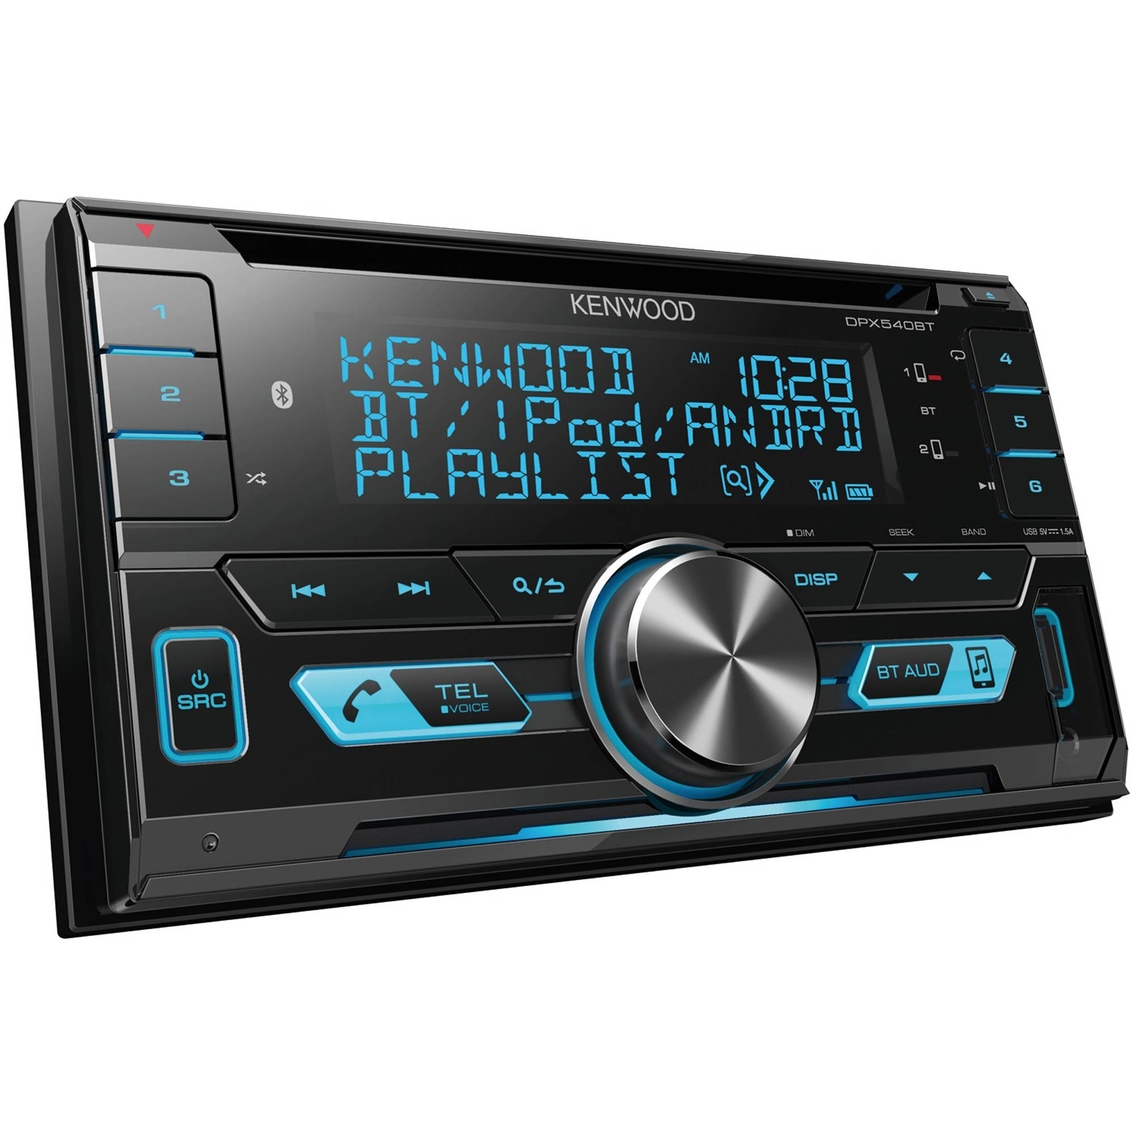 Kenwood Double-DIN In-Dash AM/FM Media Receiver with Bluetooth - Image 2 of 3